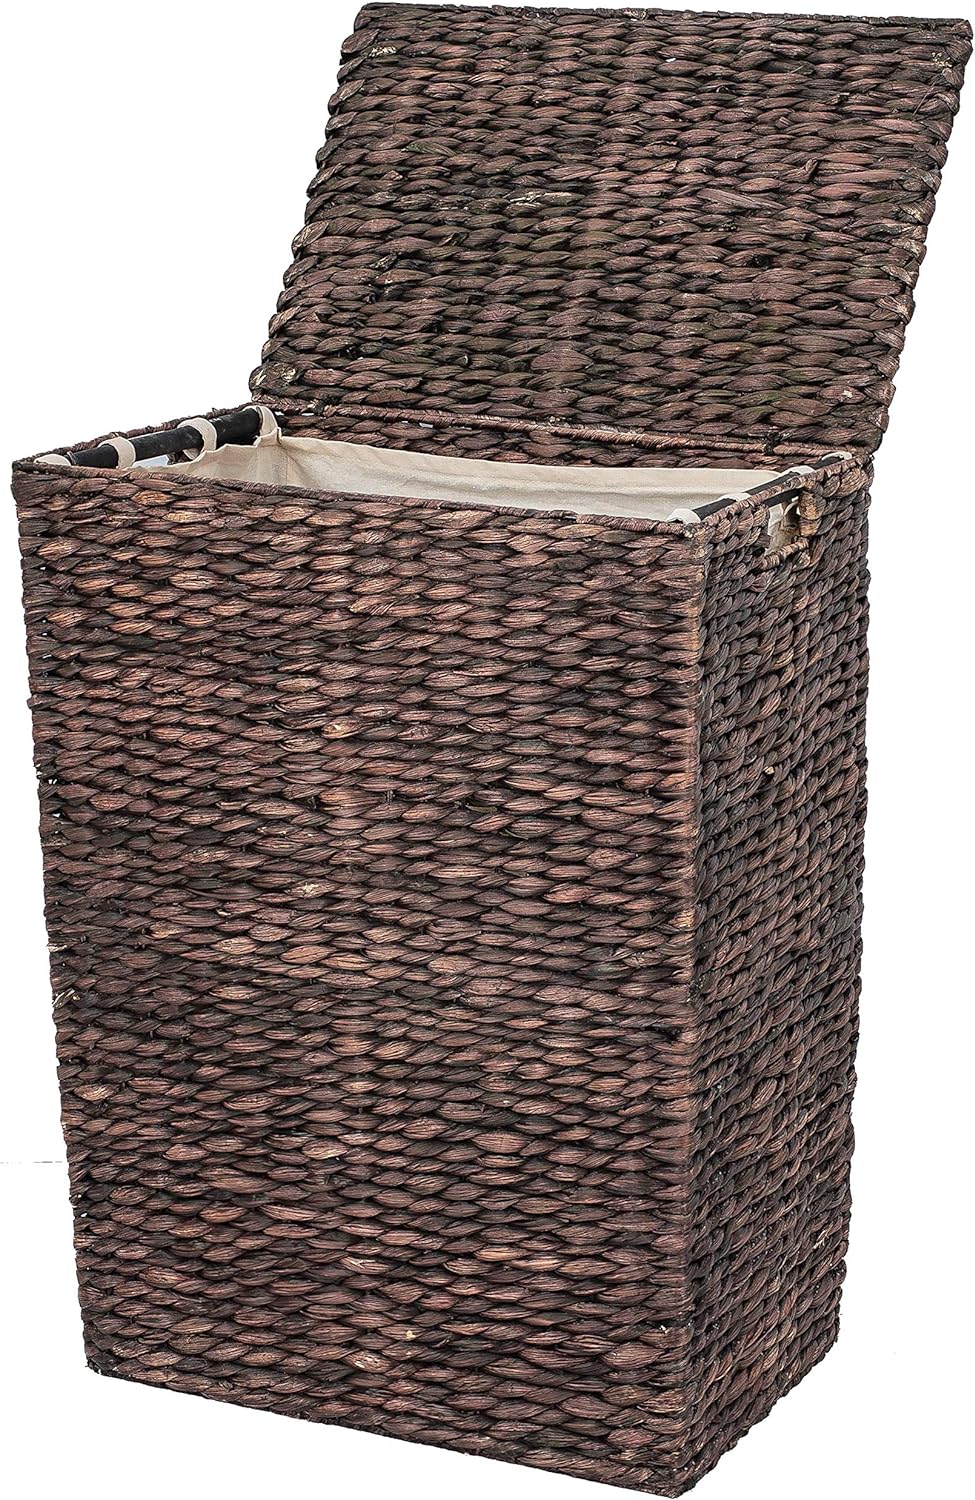 Artera Large Wicker Laundry Hamper - Woven Laundry Basket with Lid, Handles and Removable Cotton Liner for Bedroom, Bathroom, Laundry Room, 24.8 H x 18.9 W x 13 L inches (Espresso)